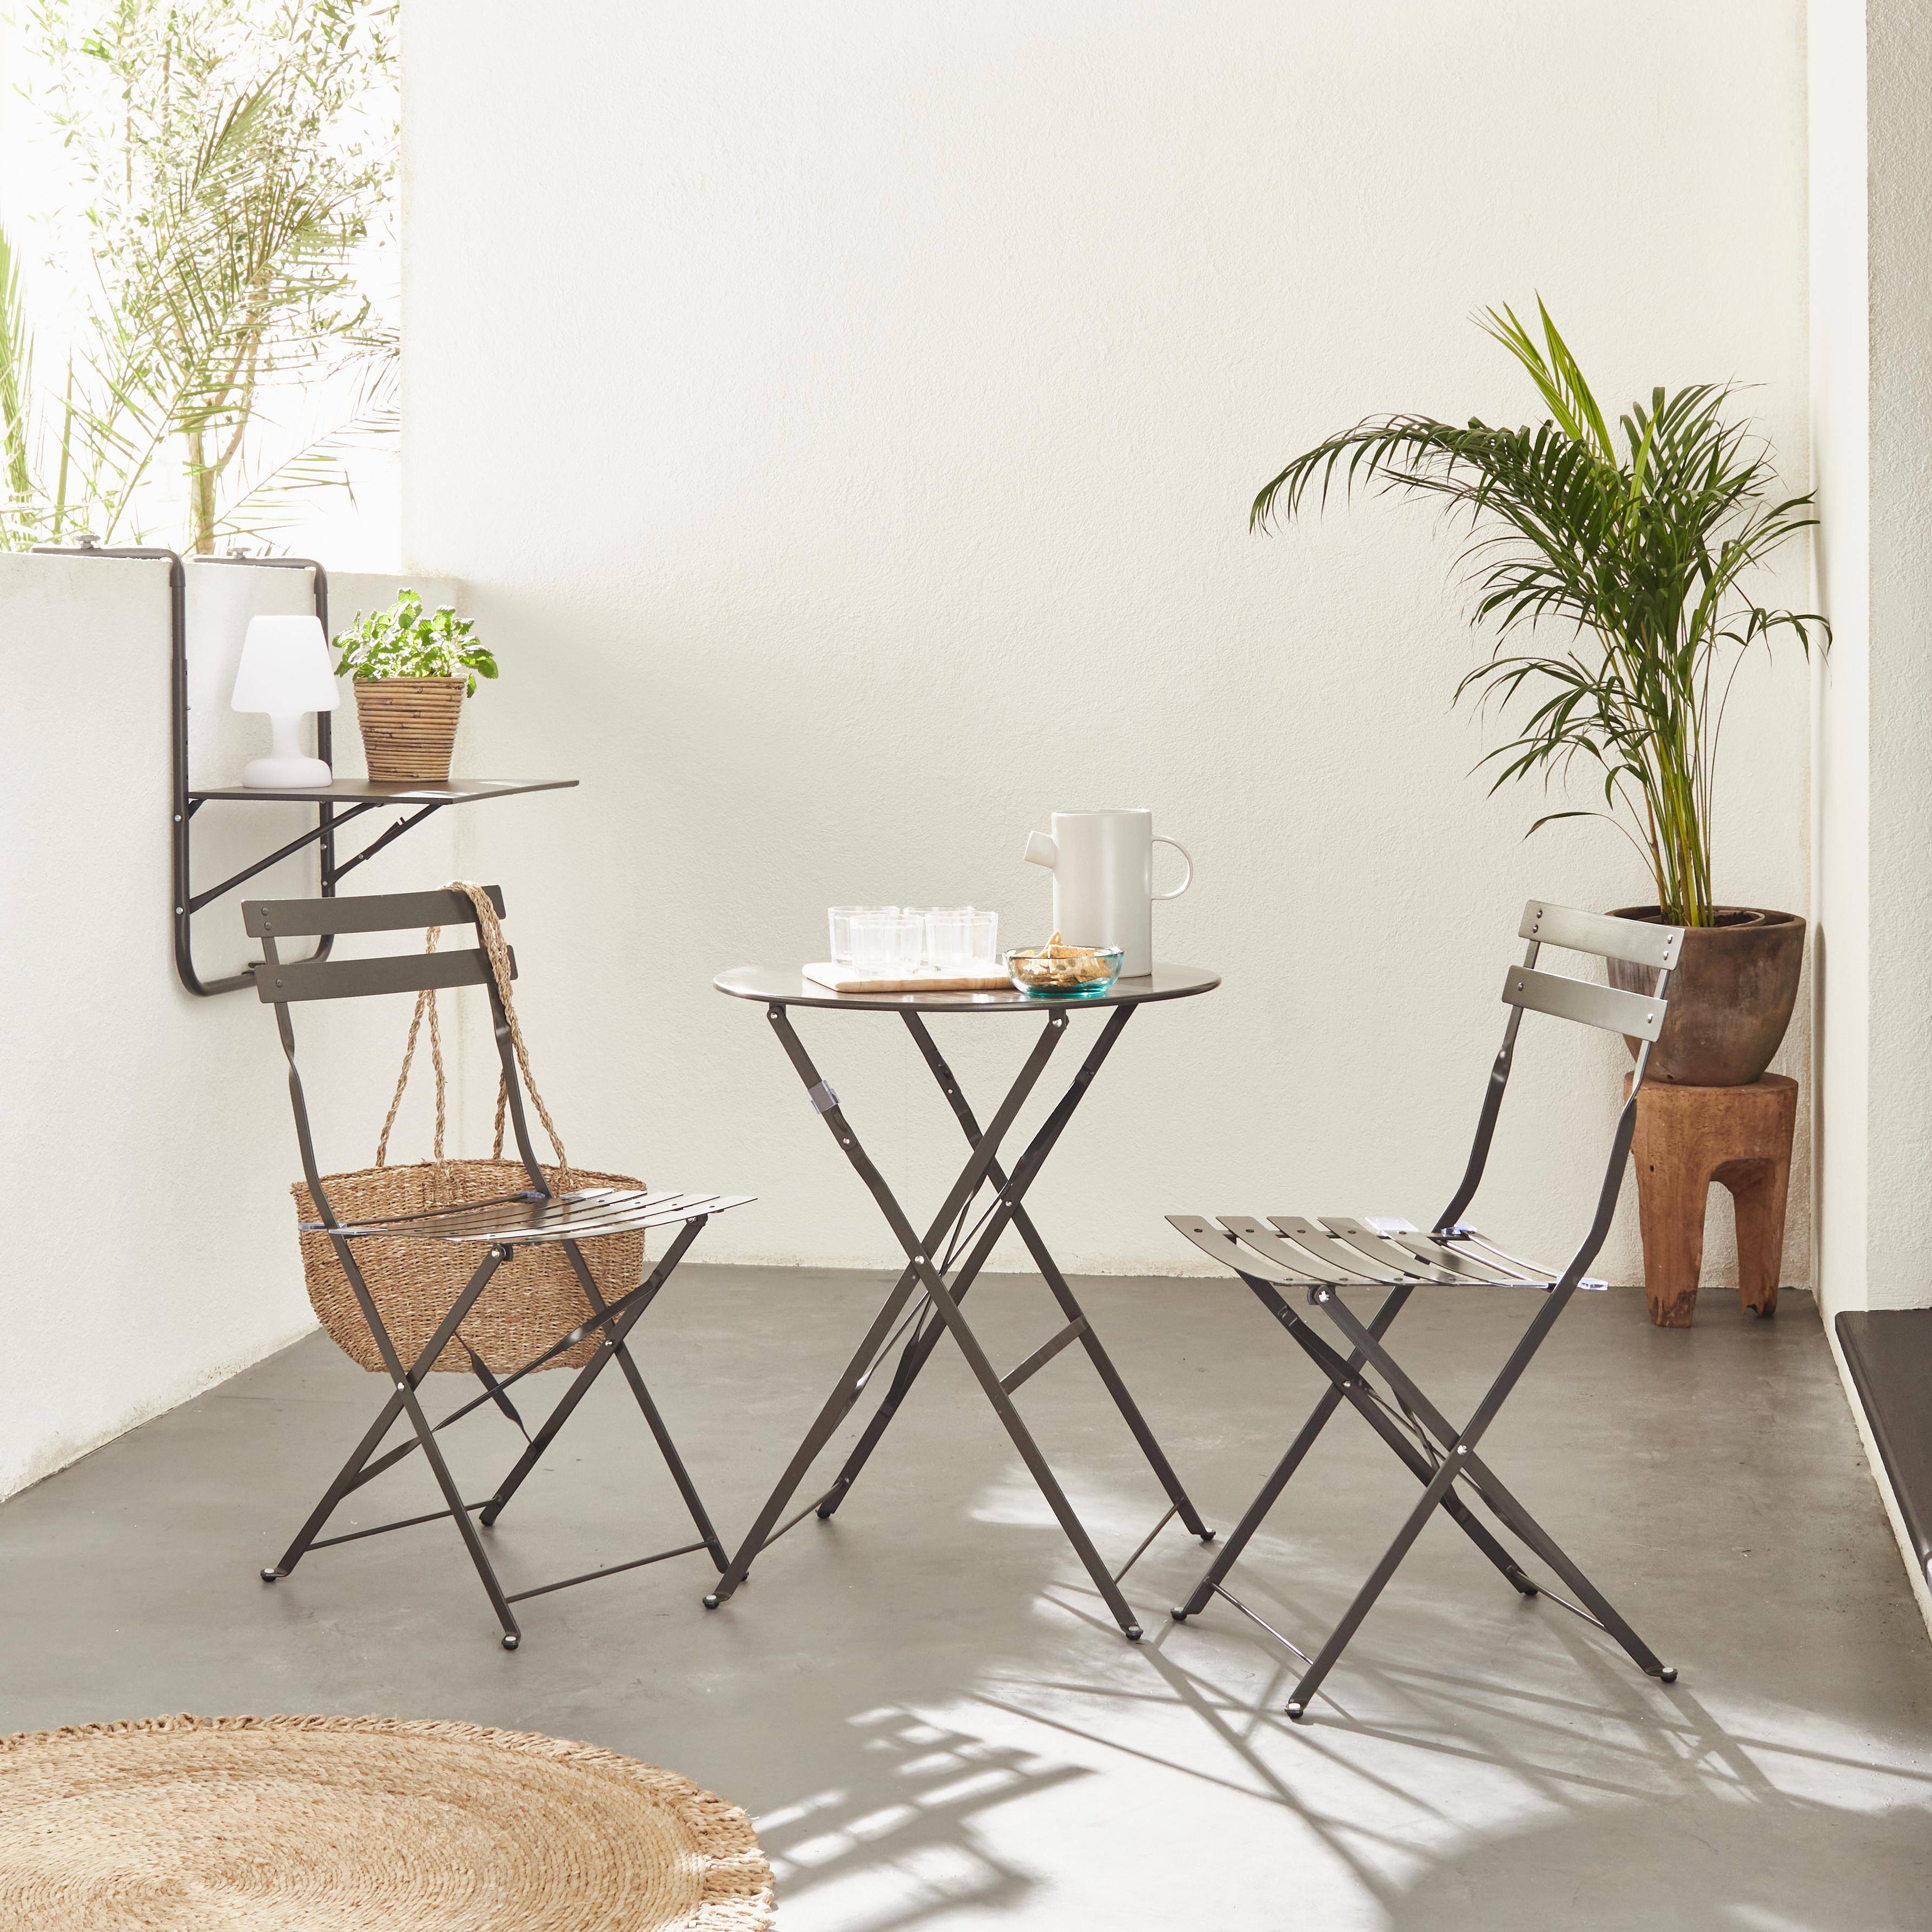 Foldable bistro garden table - Round Emilia anthracite- Round table Ø60cm, thermo-lacquered steel Photo3